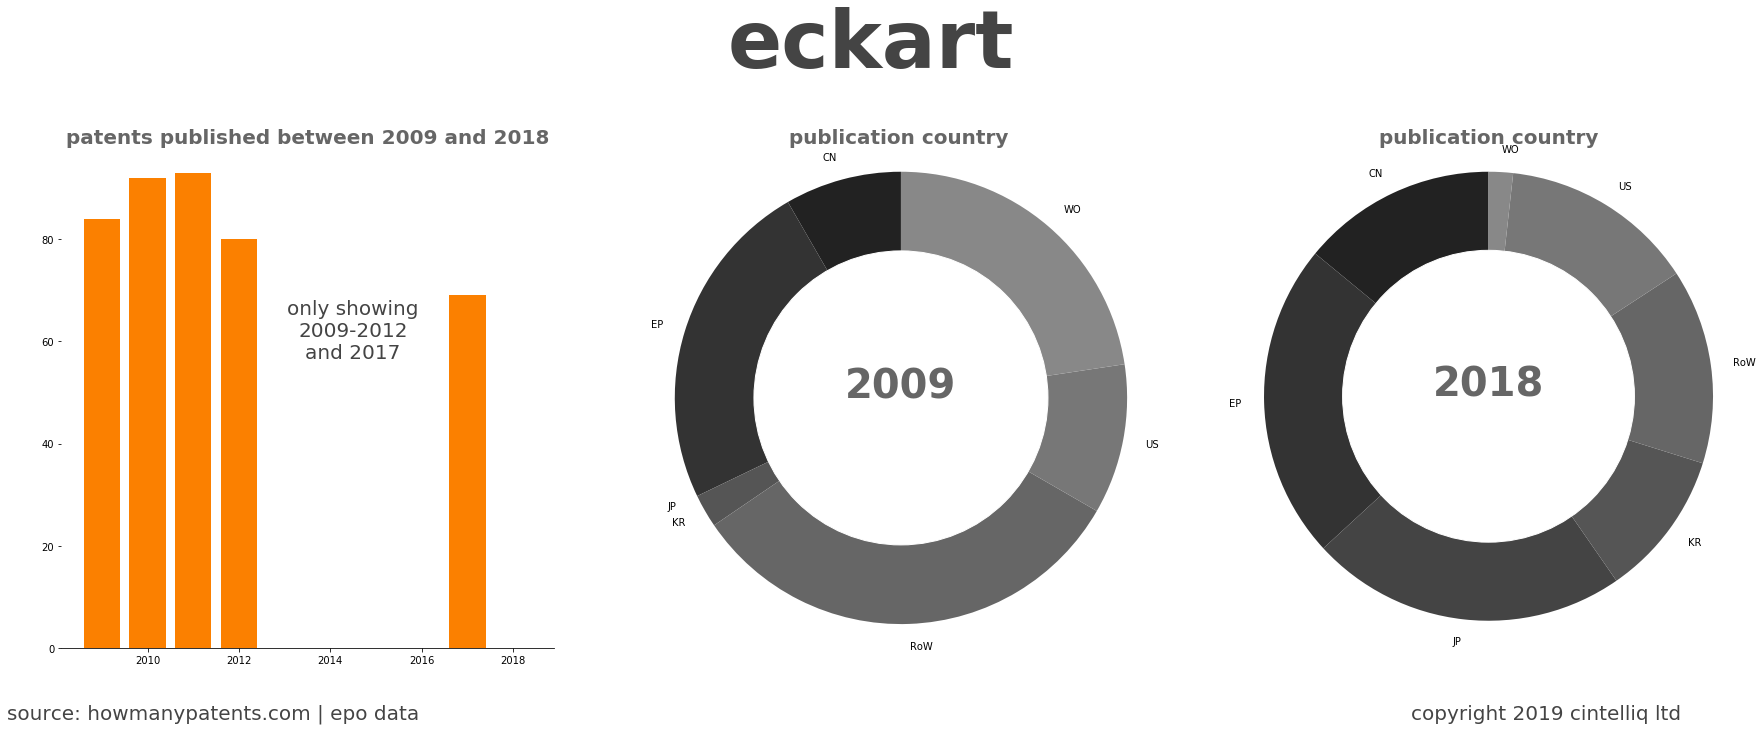 summary of patents for Eckart